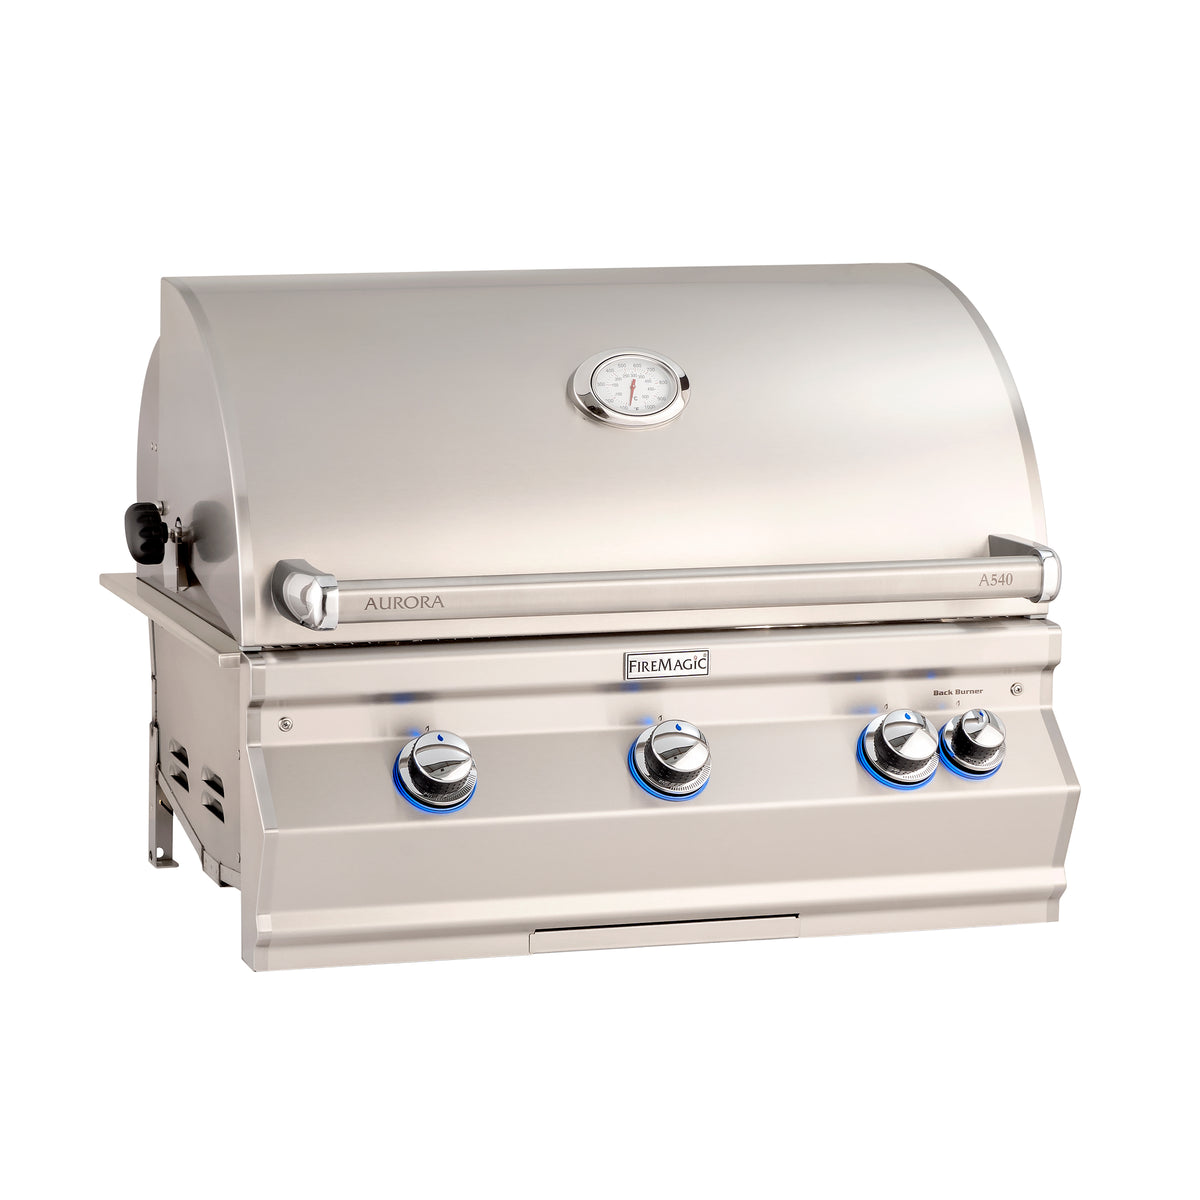 Fire Magic Aurora A540i Built-In Grill with Analog Thermometer